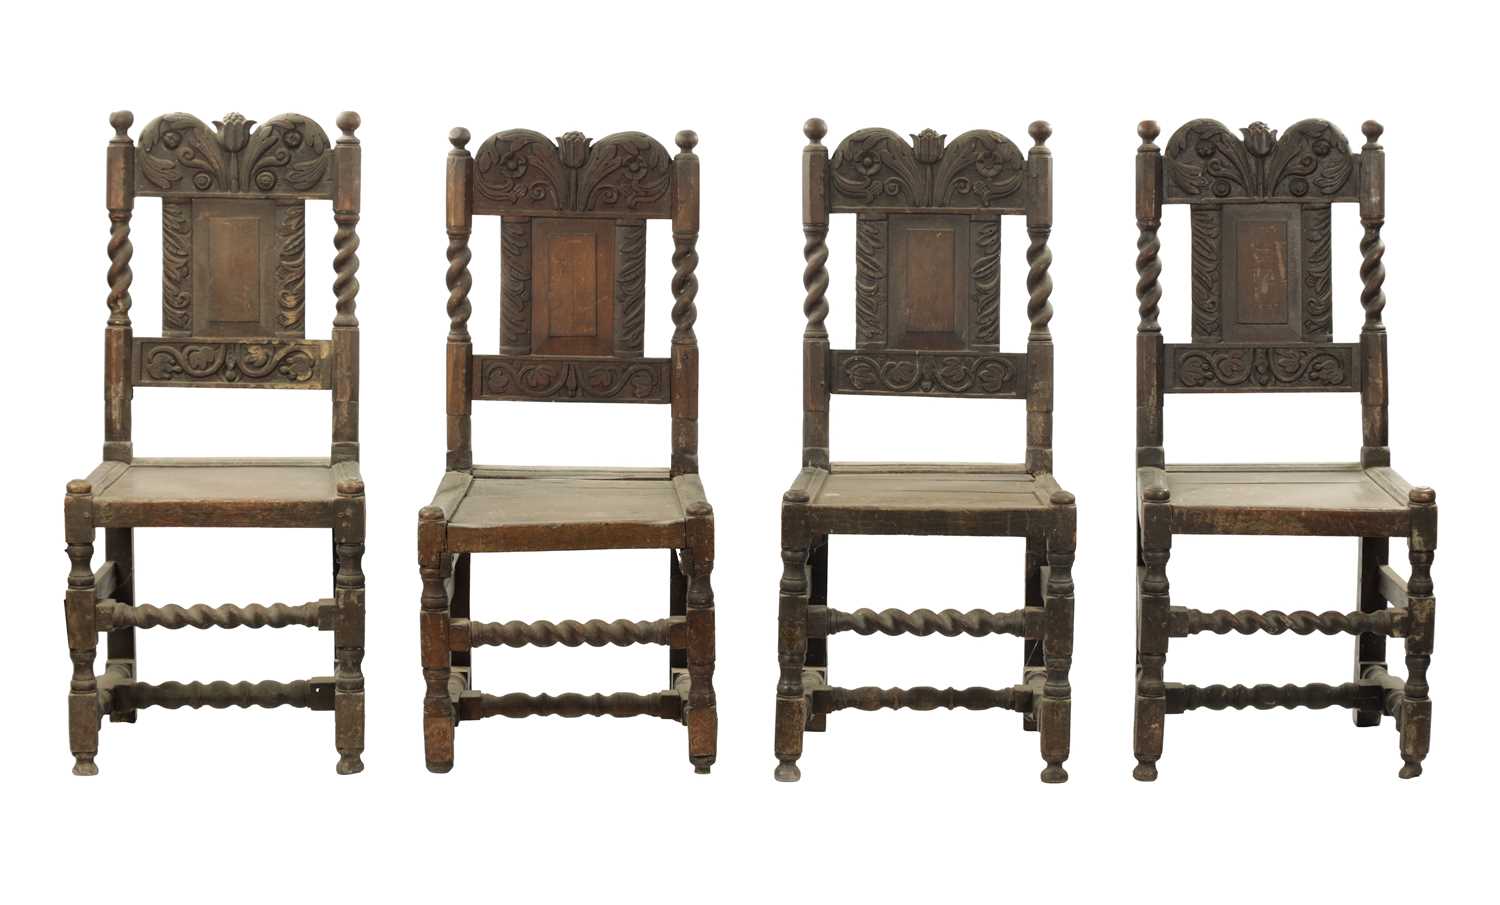 A RARE SET OF FOUR 17TH CENTURY CARVED OAK SIDE CHAIRS